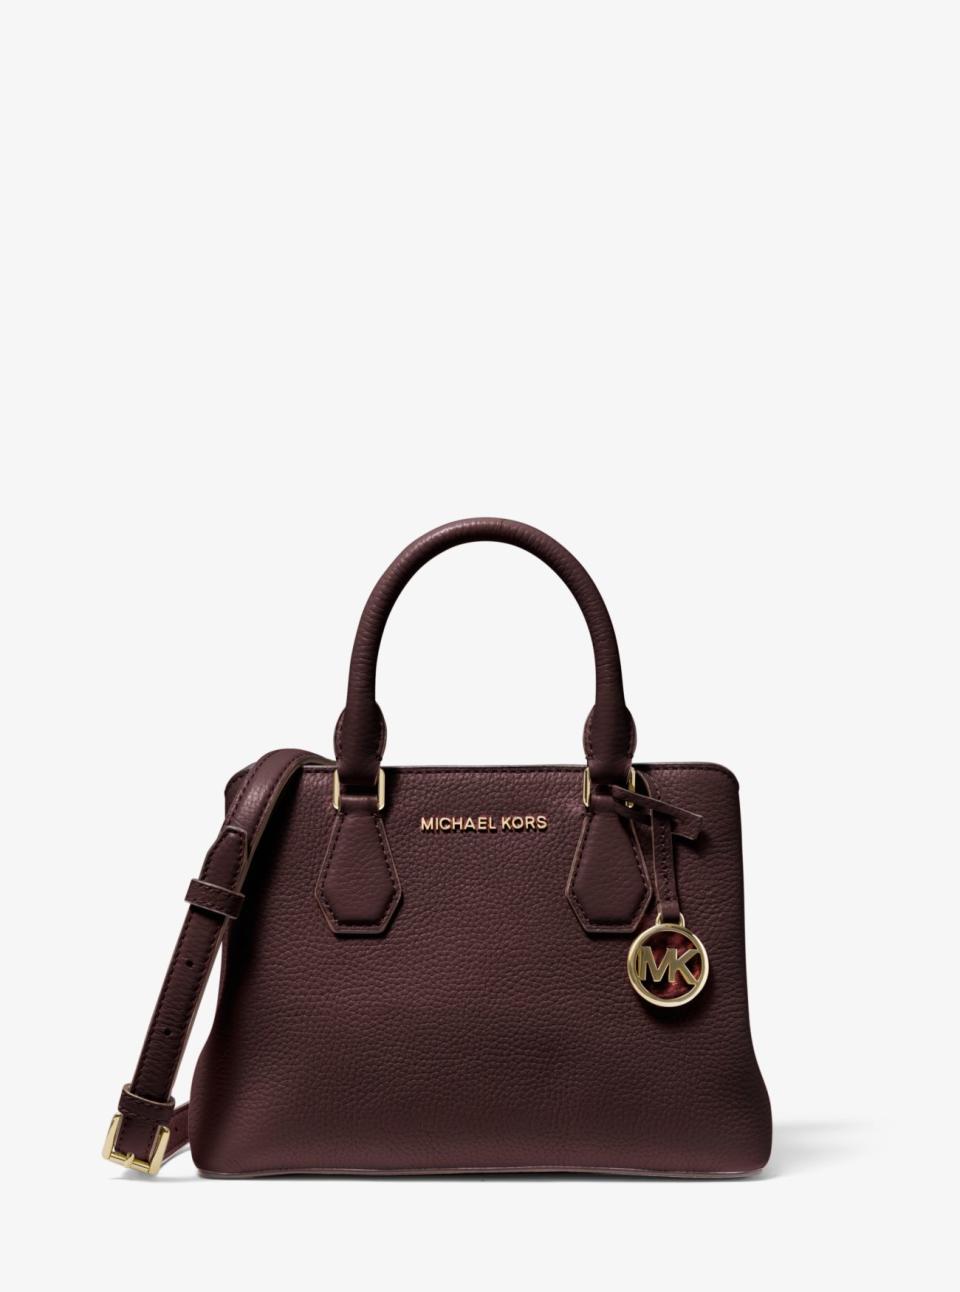 MICHAEL KORS Camille Small Leather Satchel